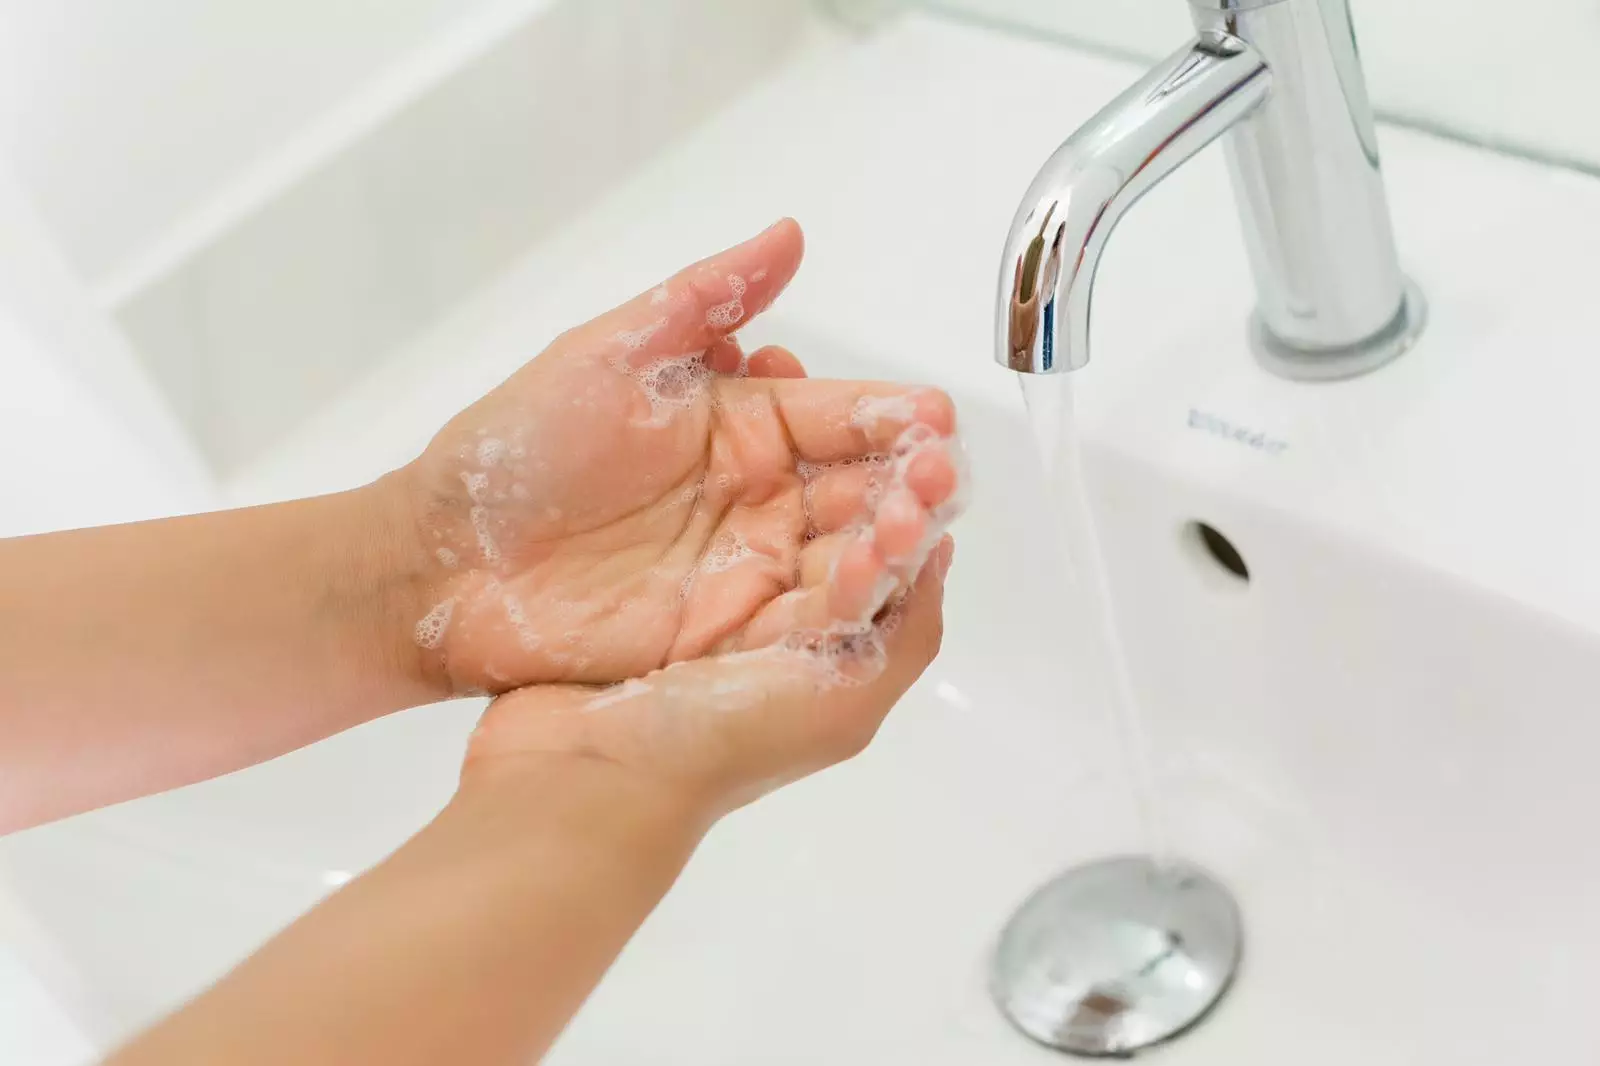 Prepare by washing your hands with soap and water (